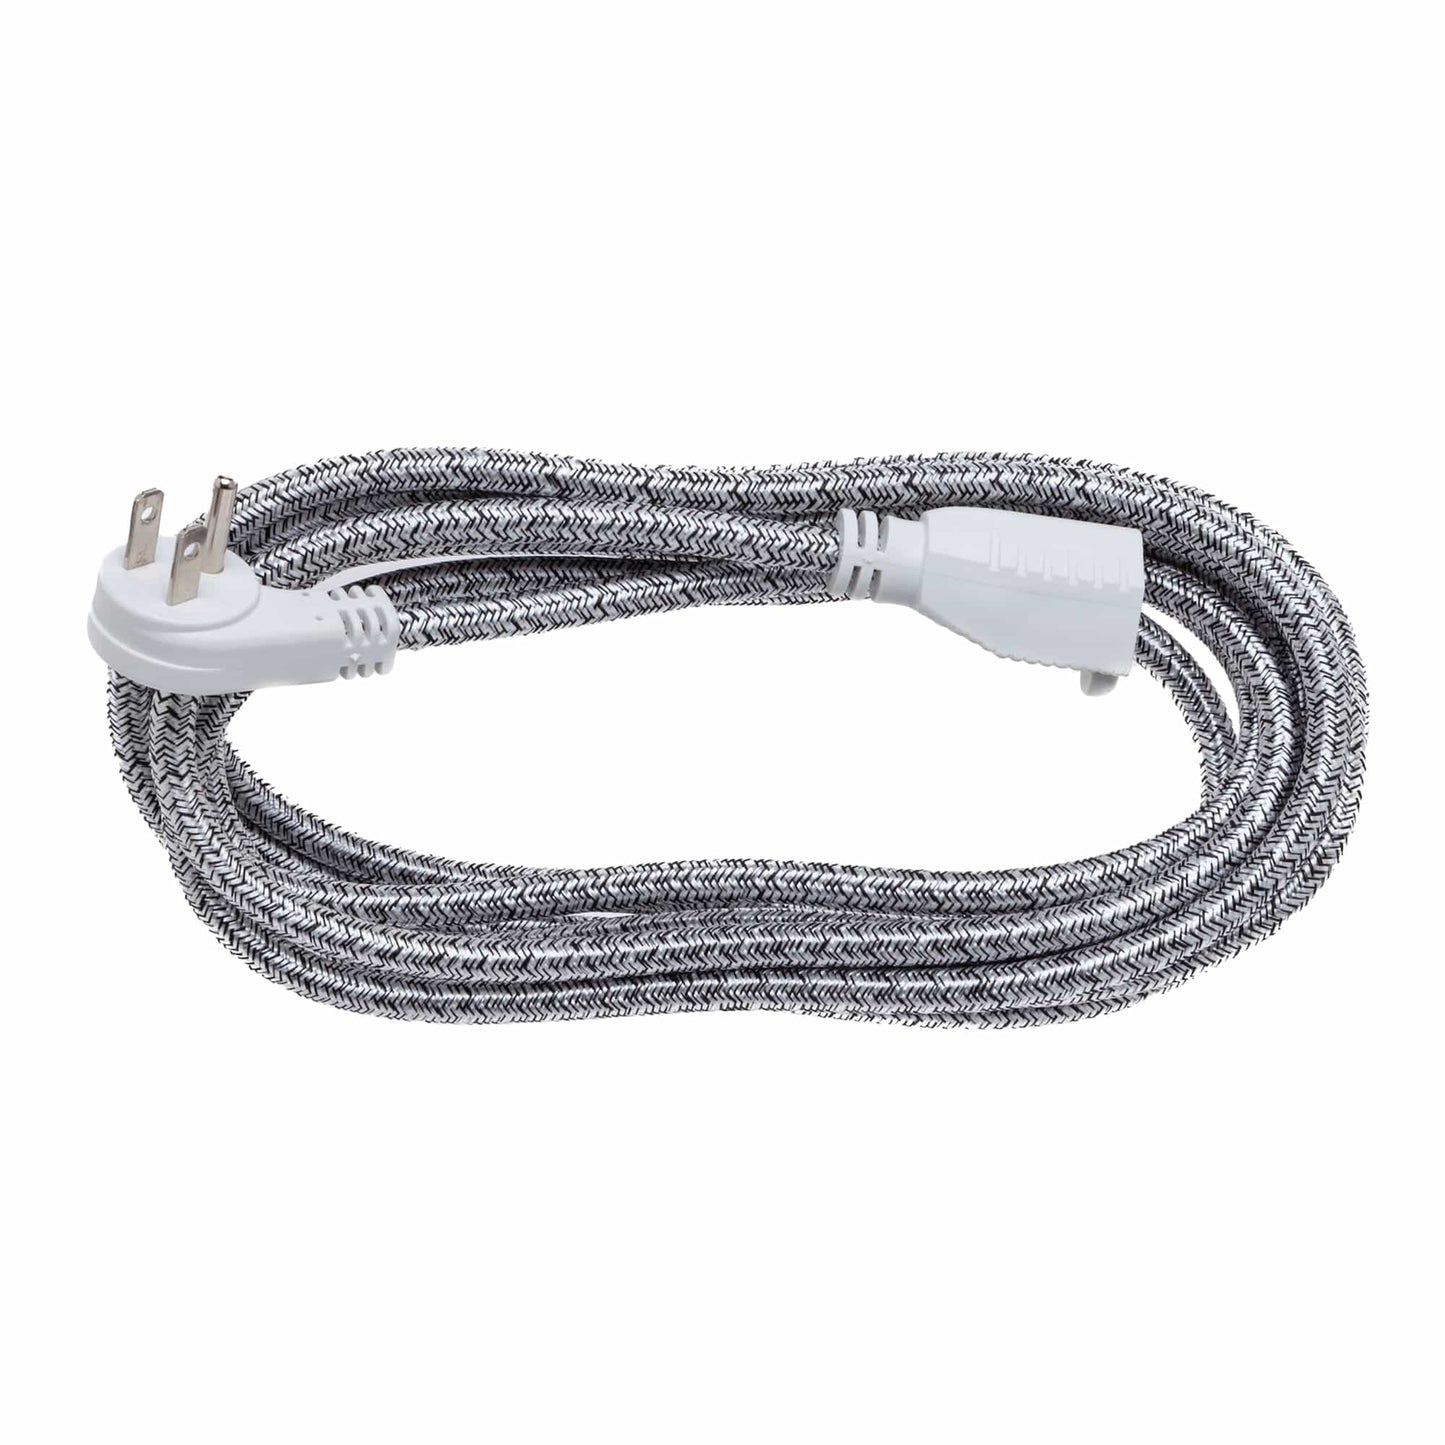 Cloth-Covered Extension Cord